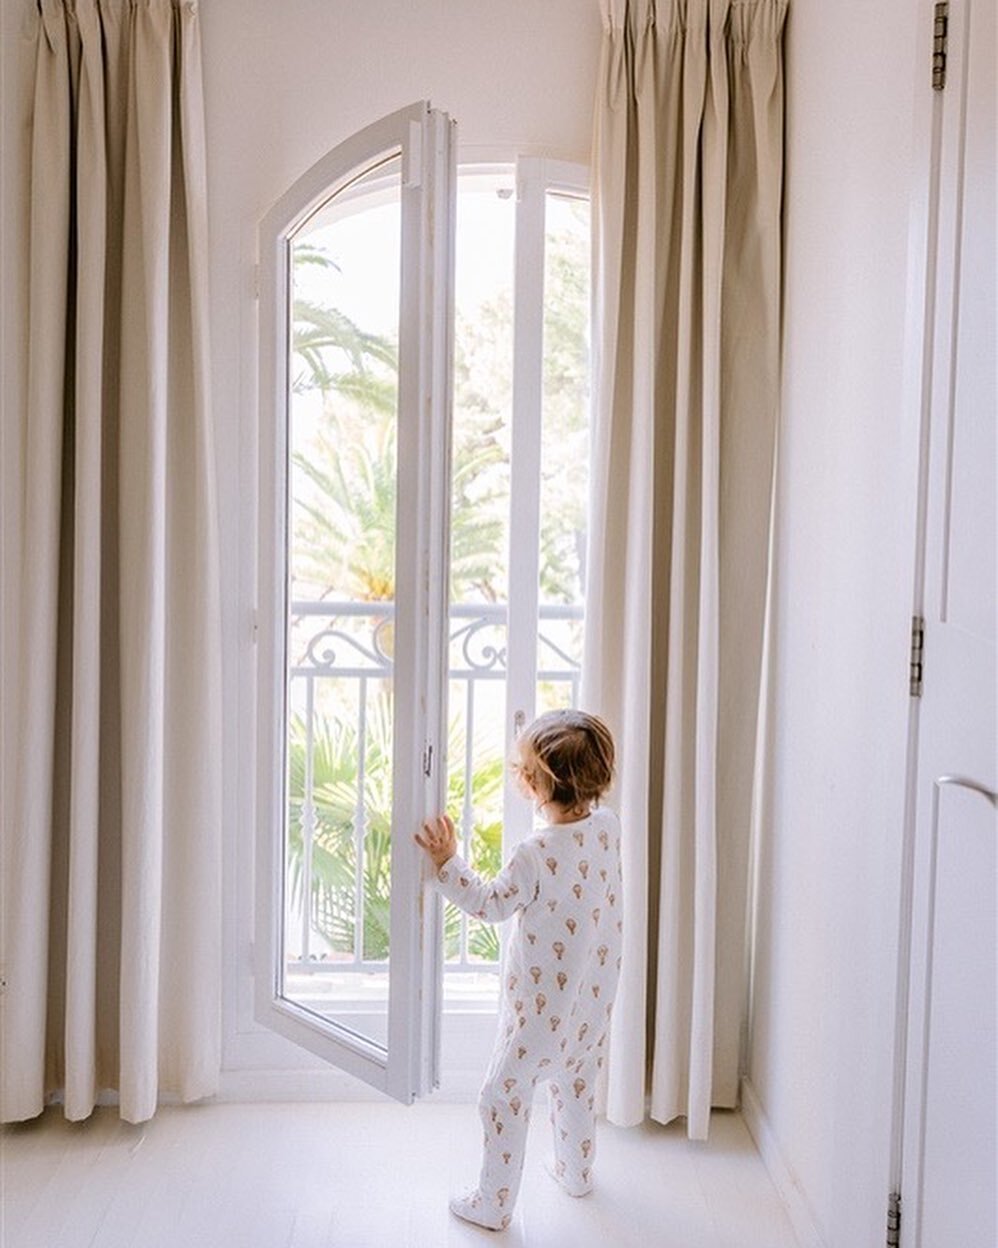 When you wake up at the beautiful Villa Martine in Cannes you know it&rsquo;s going to be a good day. Such a beautiful weekend spent amongst friends at this stunning villa. From the private chef to the chauffeured tour of a nearby village @onefinesta